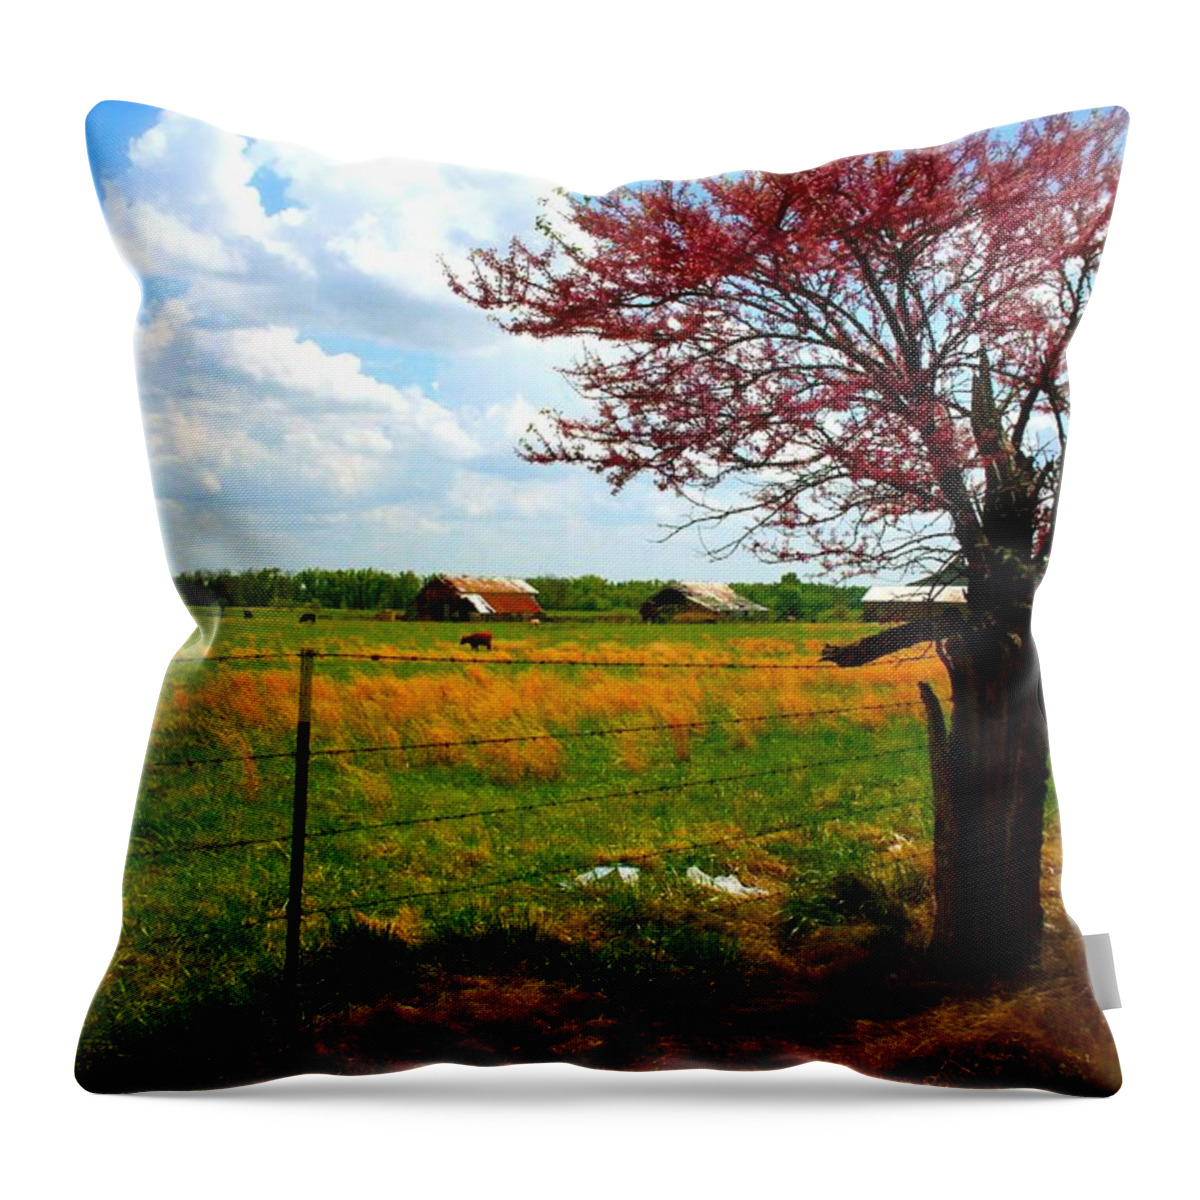 Oklahoma Throw Pillow featuring the photograph Gods Country  Commerce Miami Oklahoma by Iconic Images Art Gallery David Pucciarelli